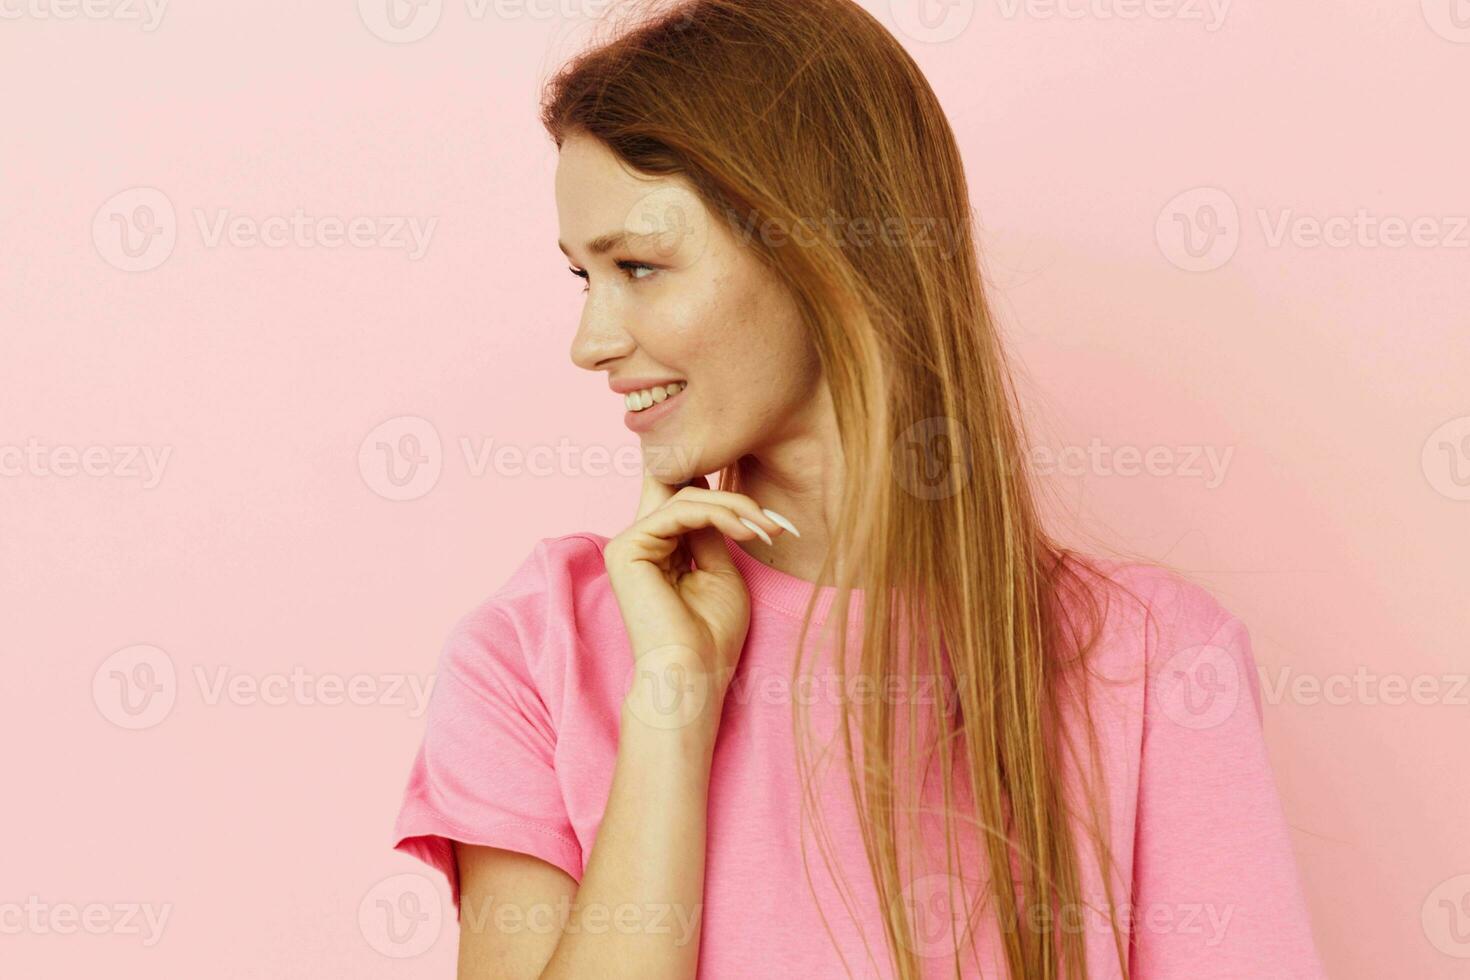 beautiful woman long hairstyle in pink t-shirts Lifestyle unaltered photo